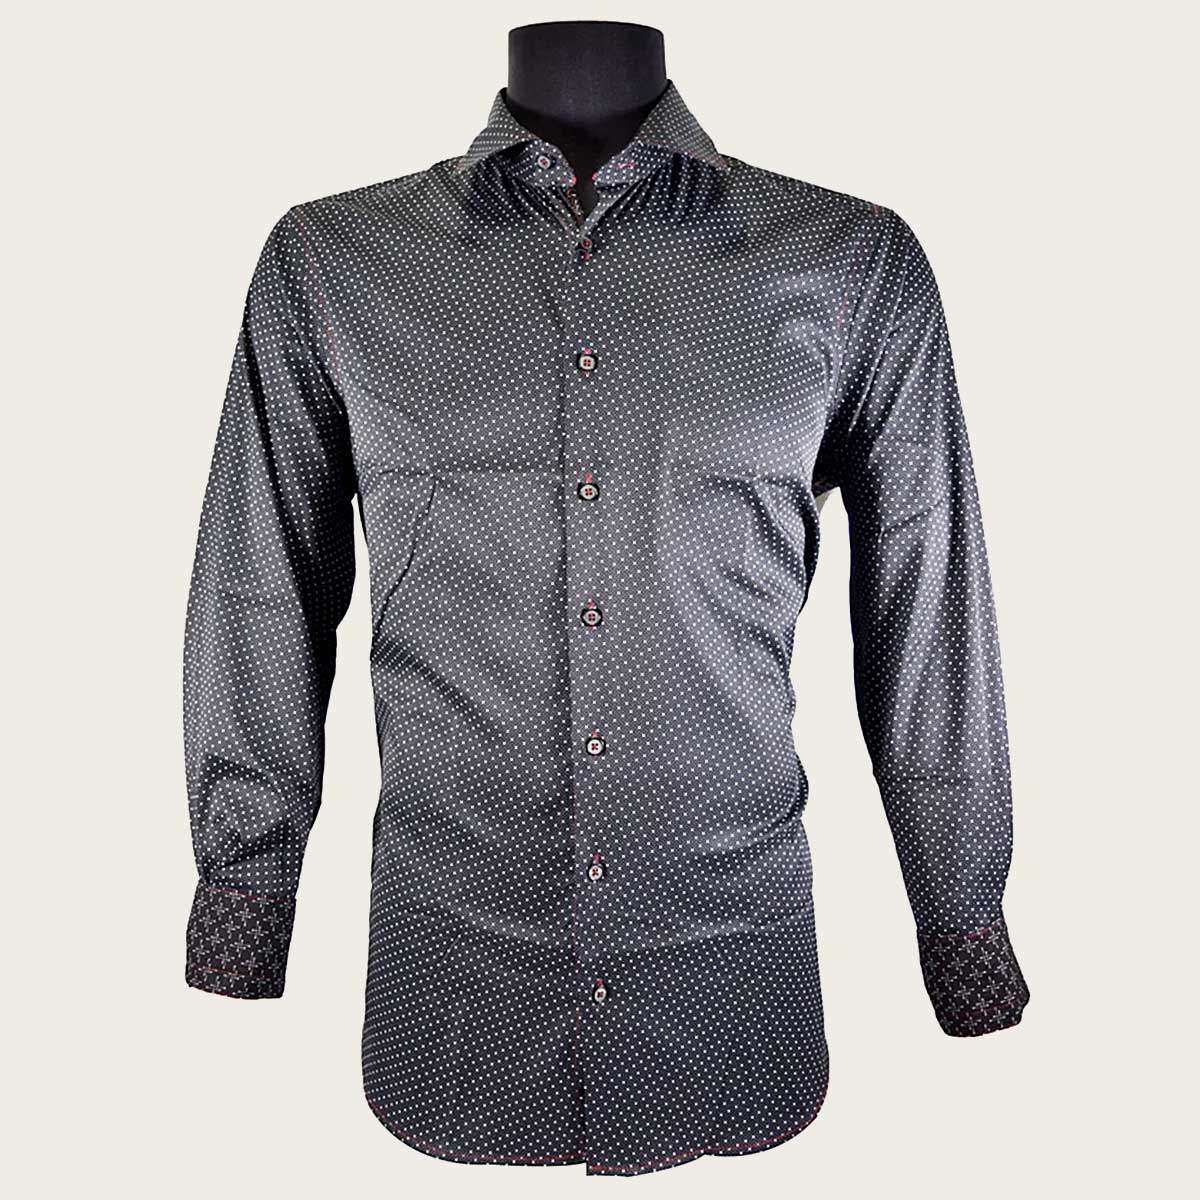 Navy blue shirt for men with white dots